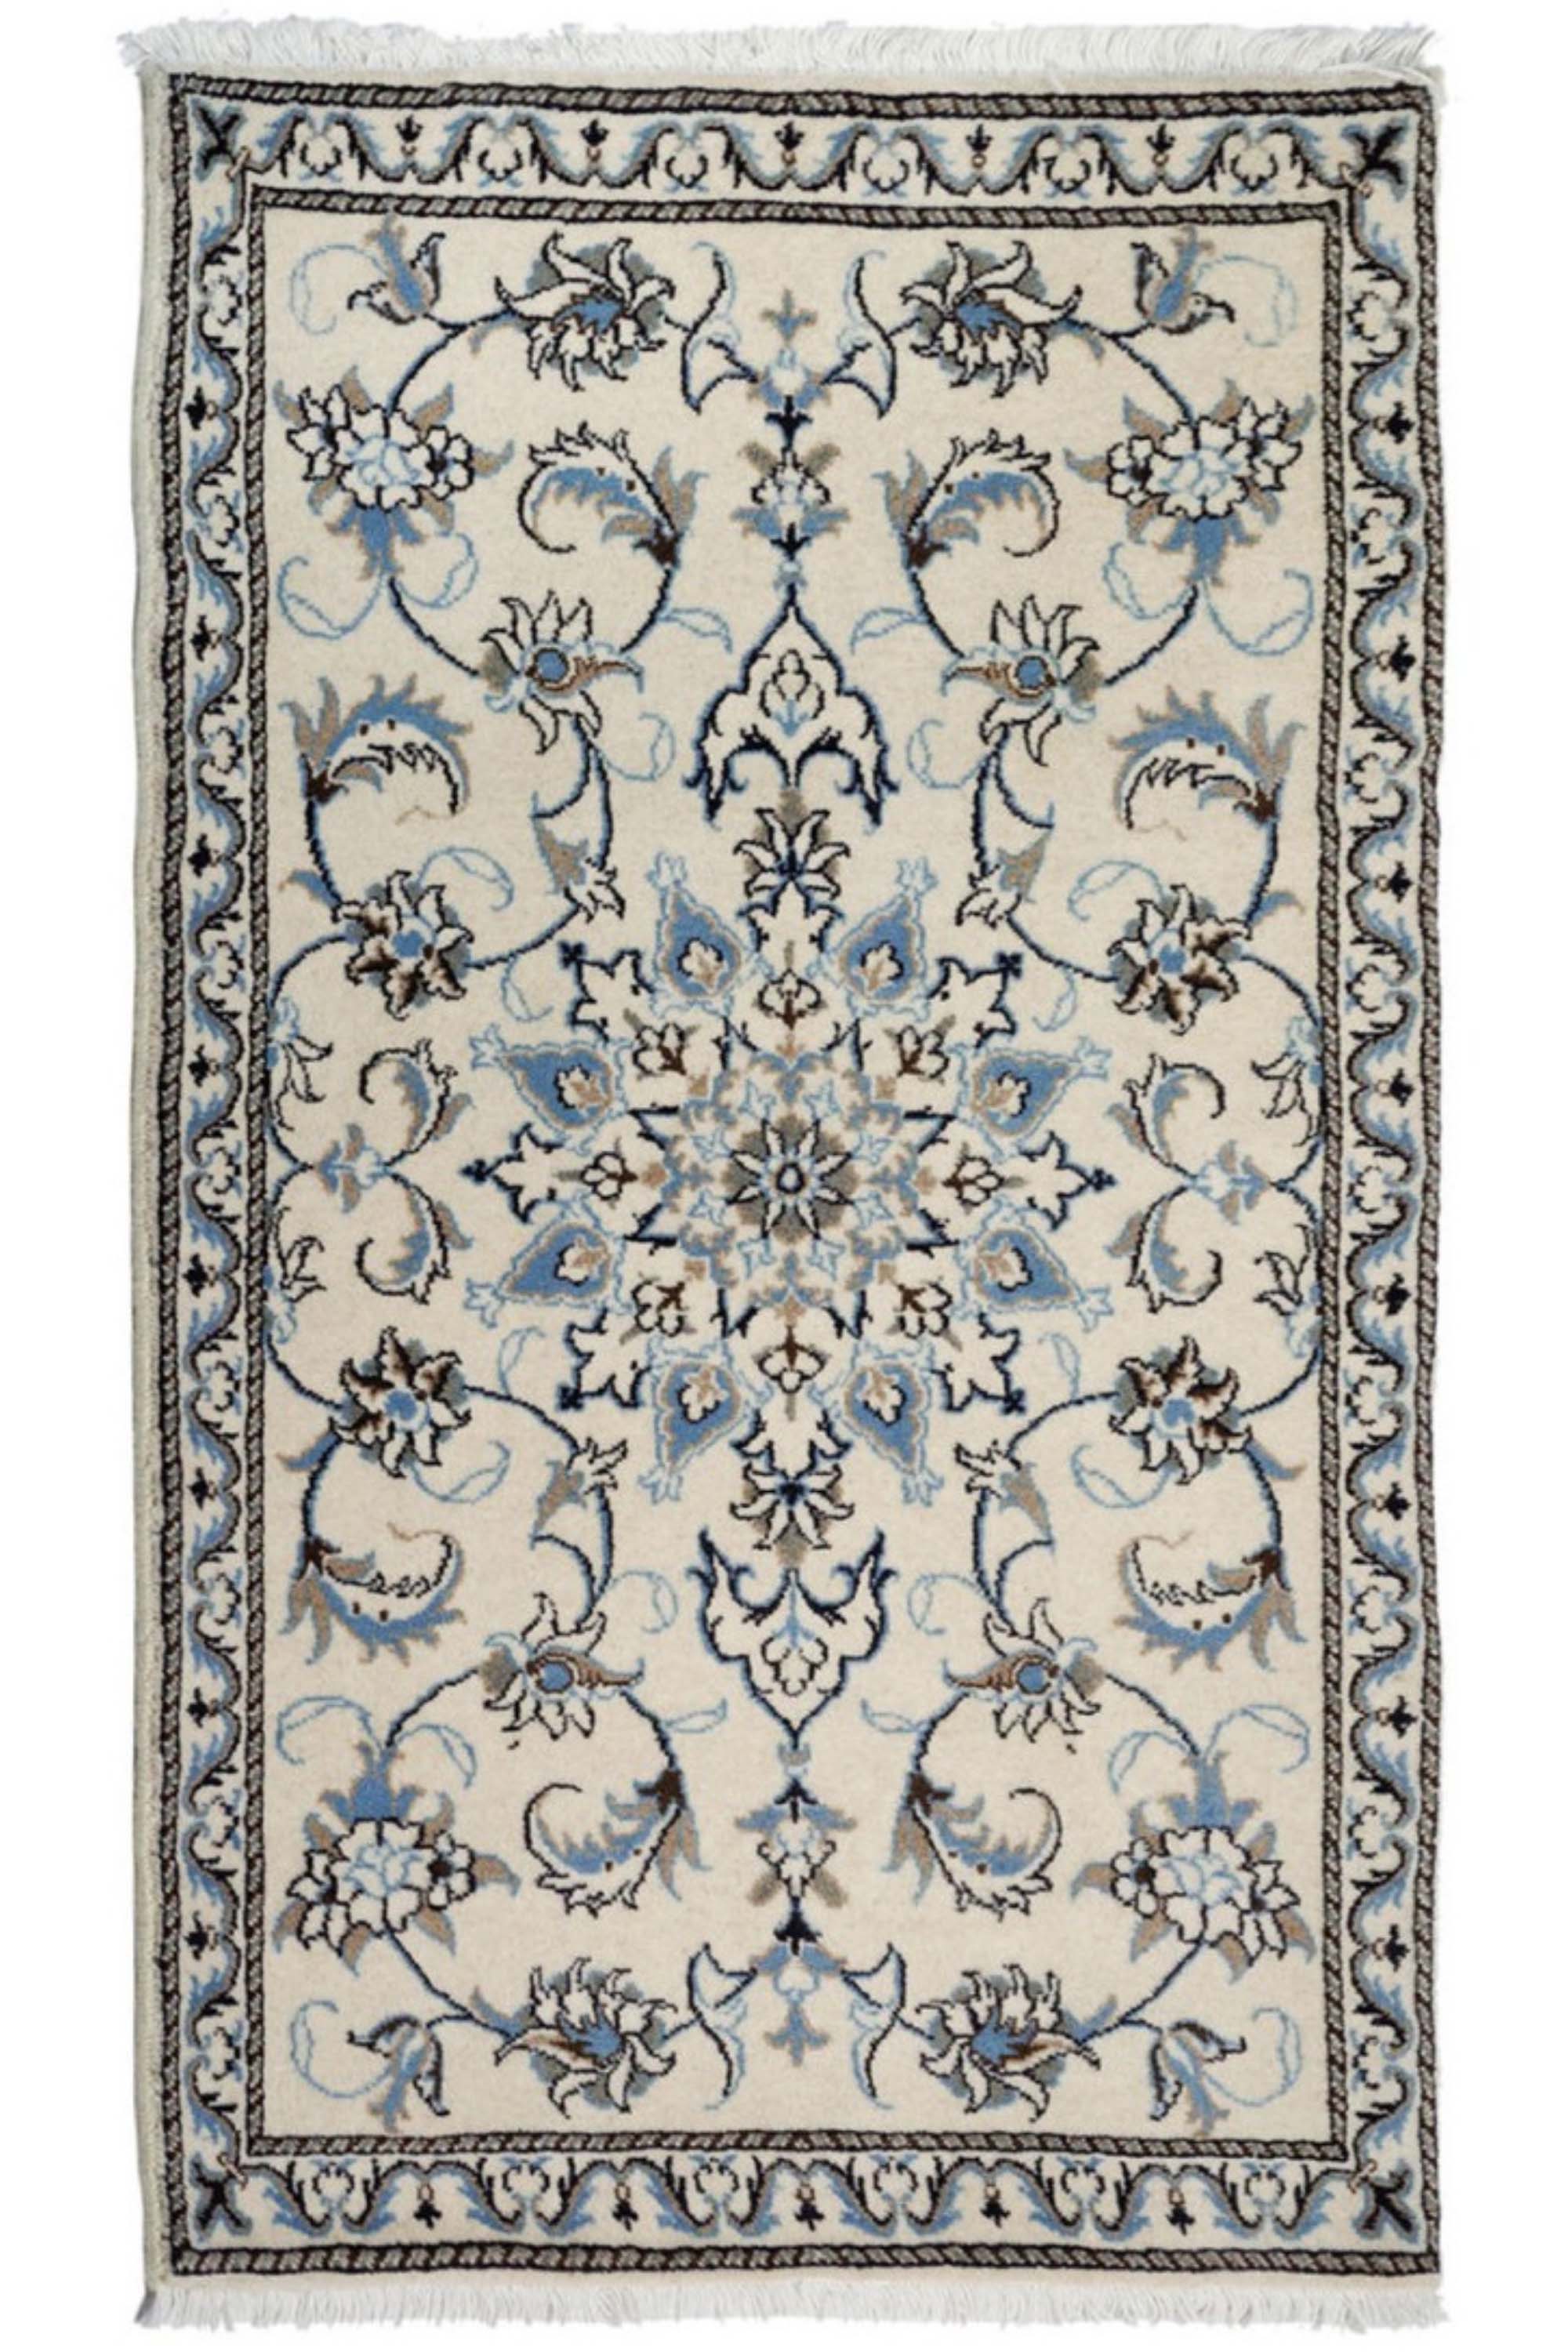 authentic persian rug with a traditional floral design in blue, ivory and cream